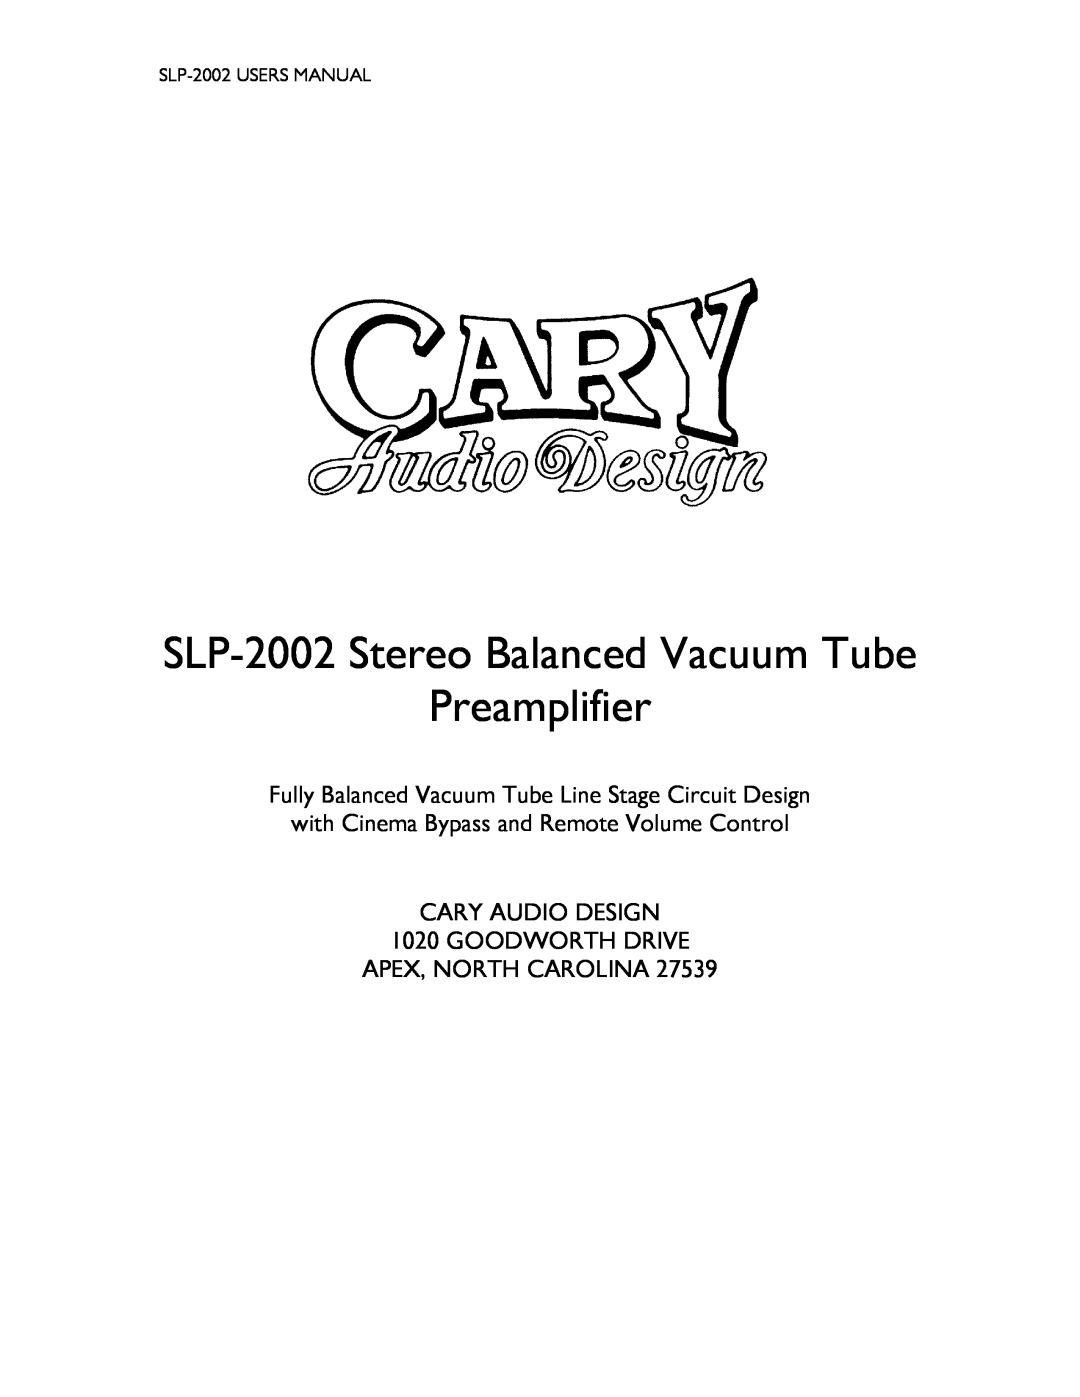 Cary Audio Design user manual SLP-2002Stereo Balanced Vacuum Tube Preamplifier, CARY AUDIO DESIGN 1020 GOODWORTH DRIVE 